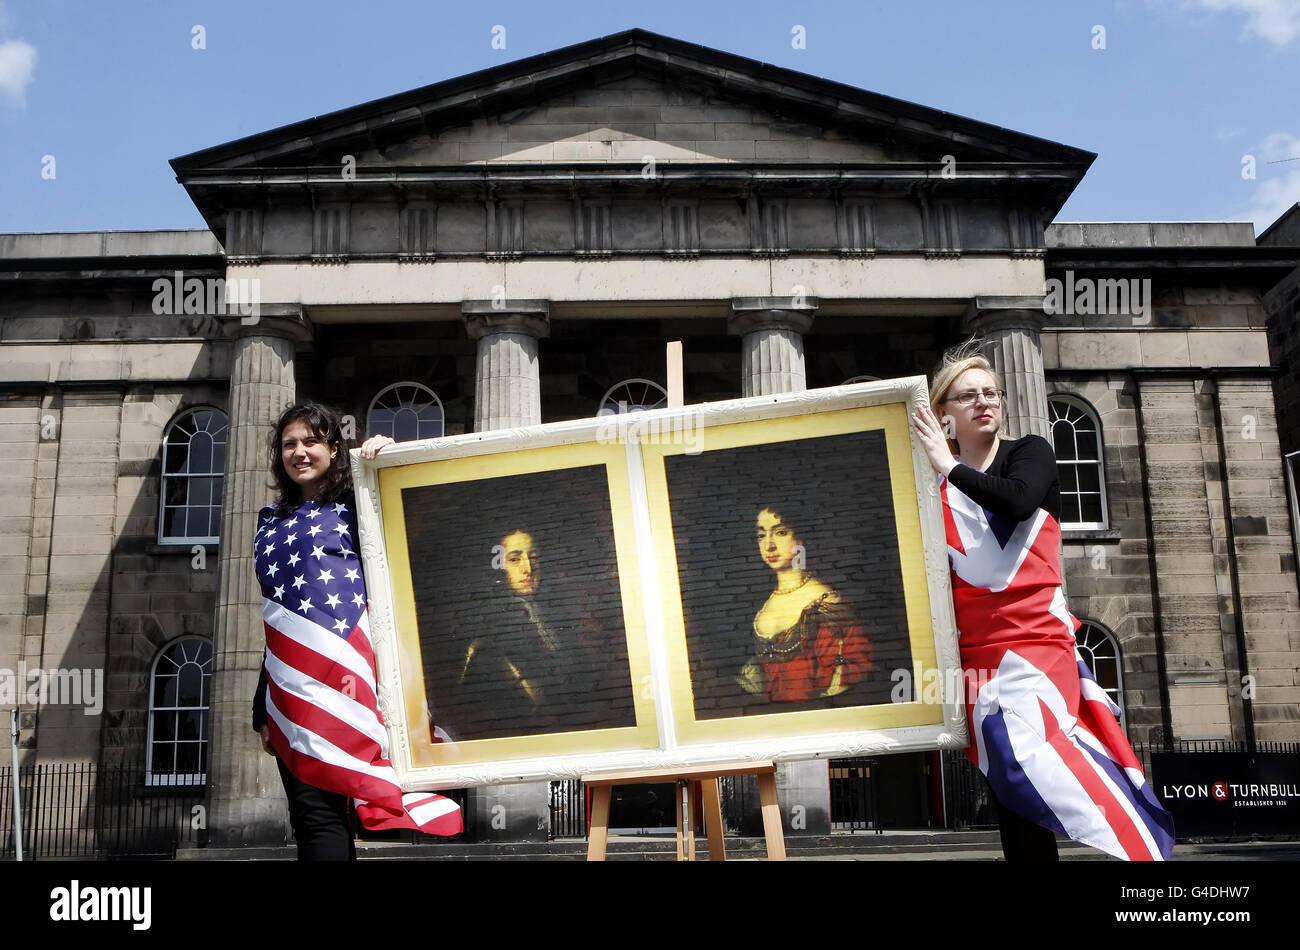 Freemans auctioneers employee Clemence Duchon (left) and Lyon & Turnbull auctioneers employee Rebecca Wall, hold an old master painting of King William of Orange and Queen Mary painted by an unknown artist from the school of Sir Godfrey Kneller, to promote a joint Old Master Paintings Sales. Stock Photo